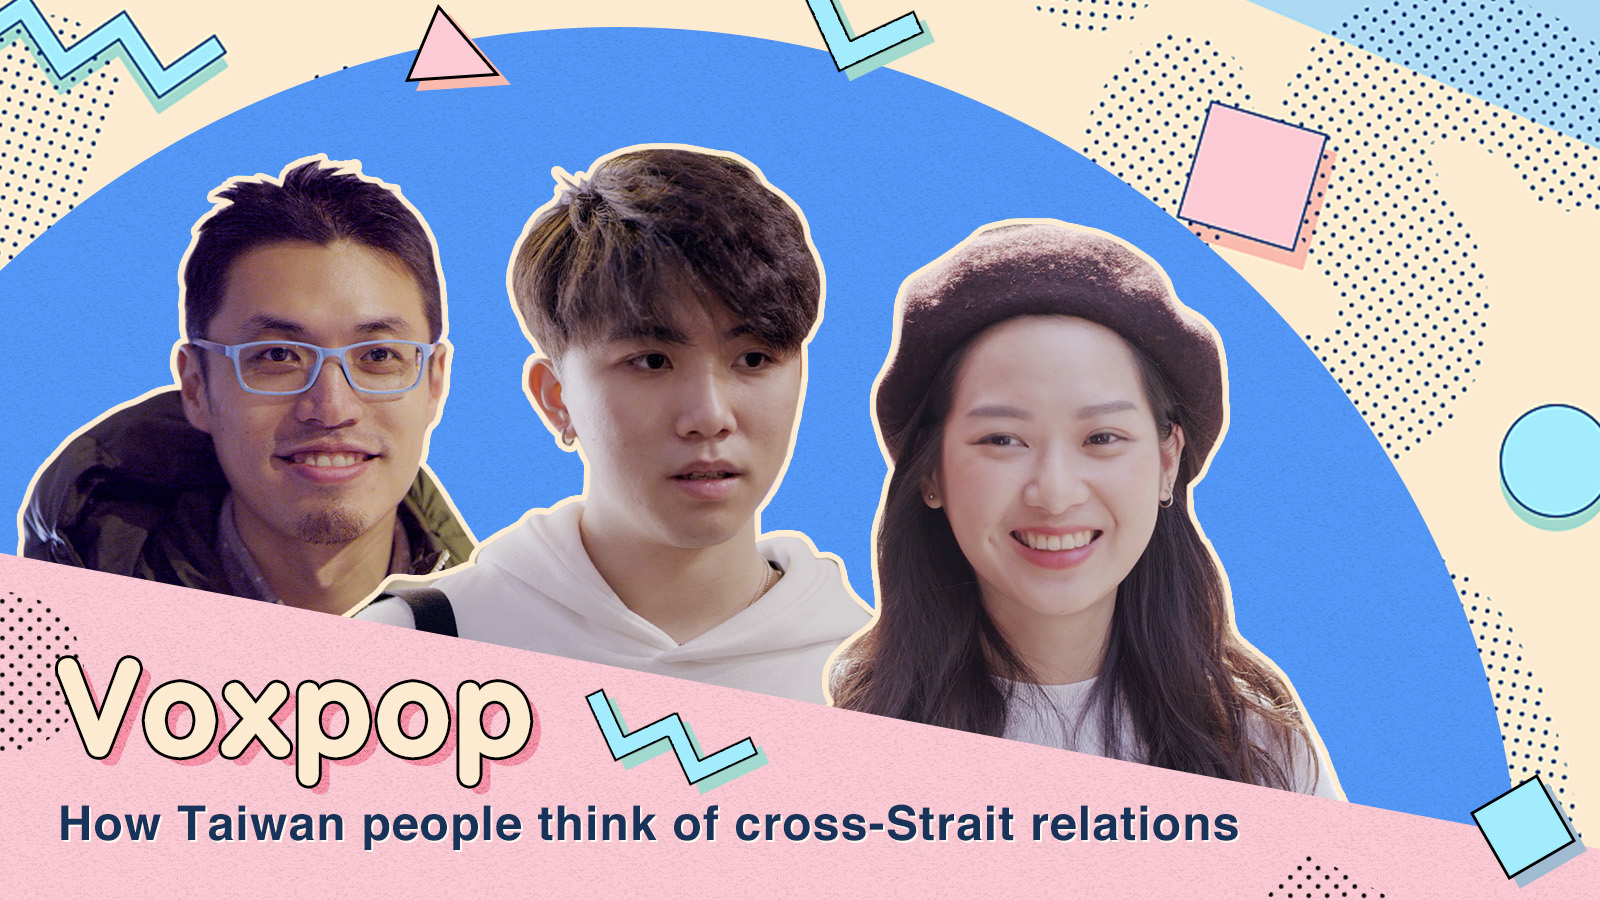 What do people in Taiwan think about cross-Strait relations?